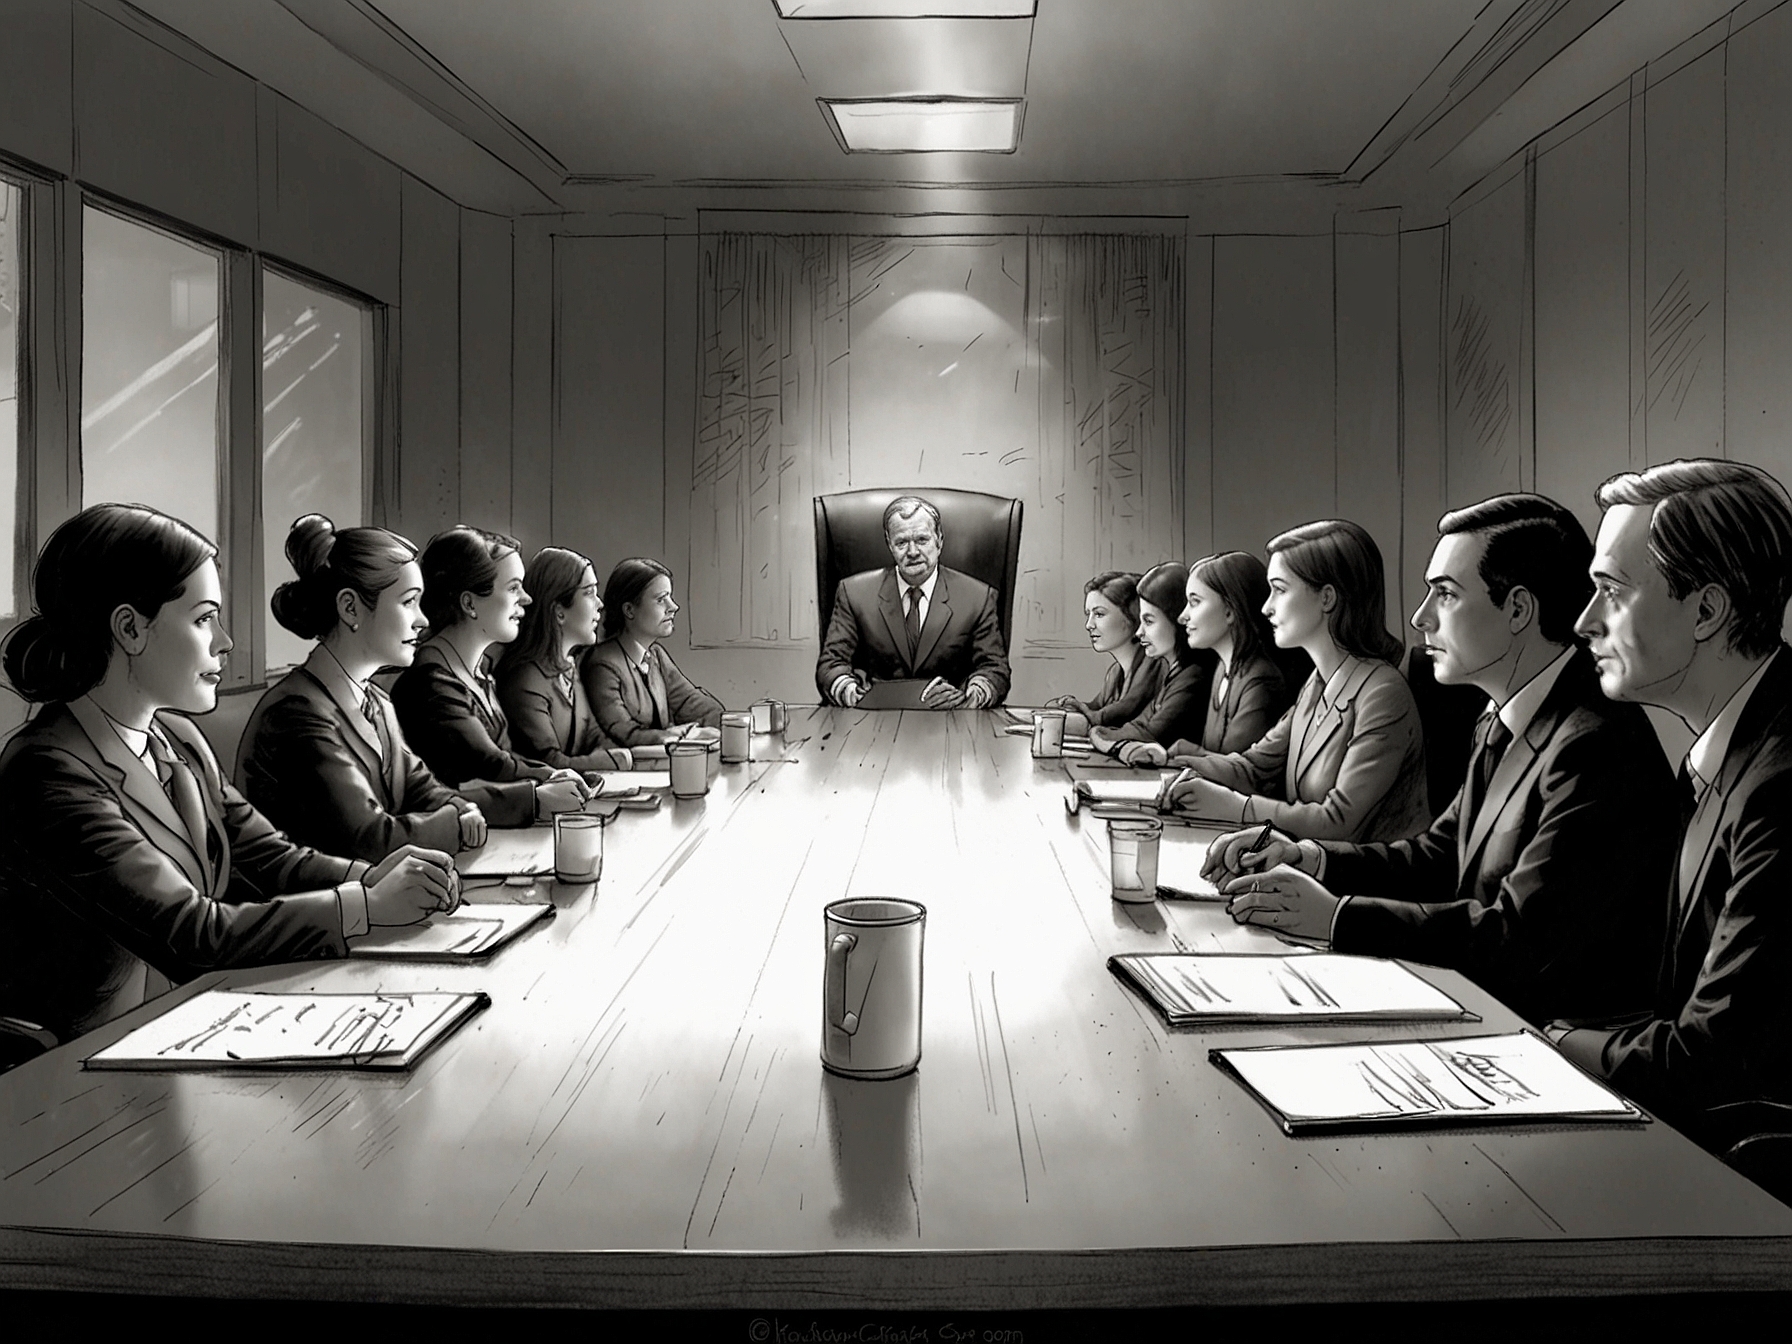 A boardroom scene depicting executives in a meeting, illustrating ongoing efforts to develop a viable restructuring plan to stabilize Chicken Soup for the Soul's finances and keep the company operational.